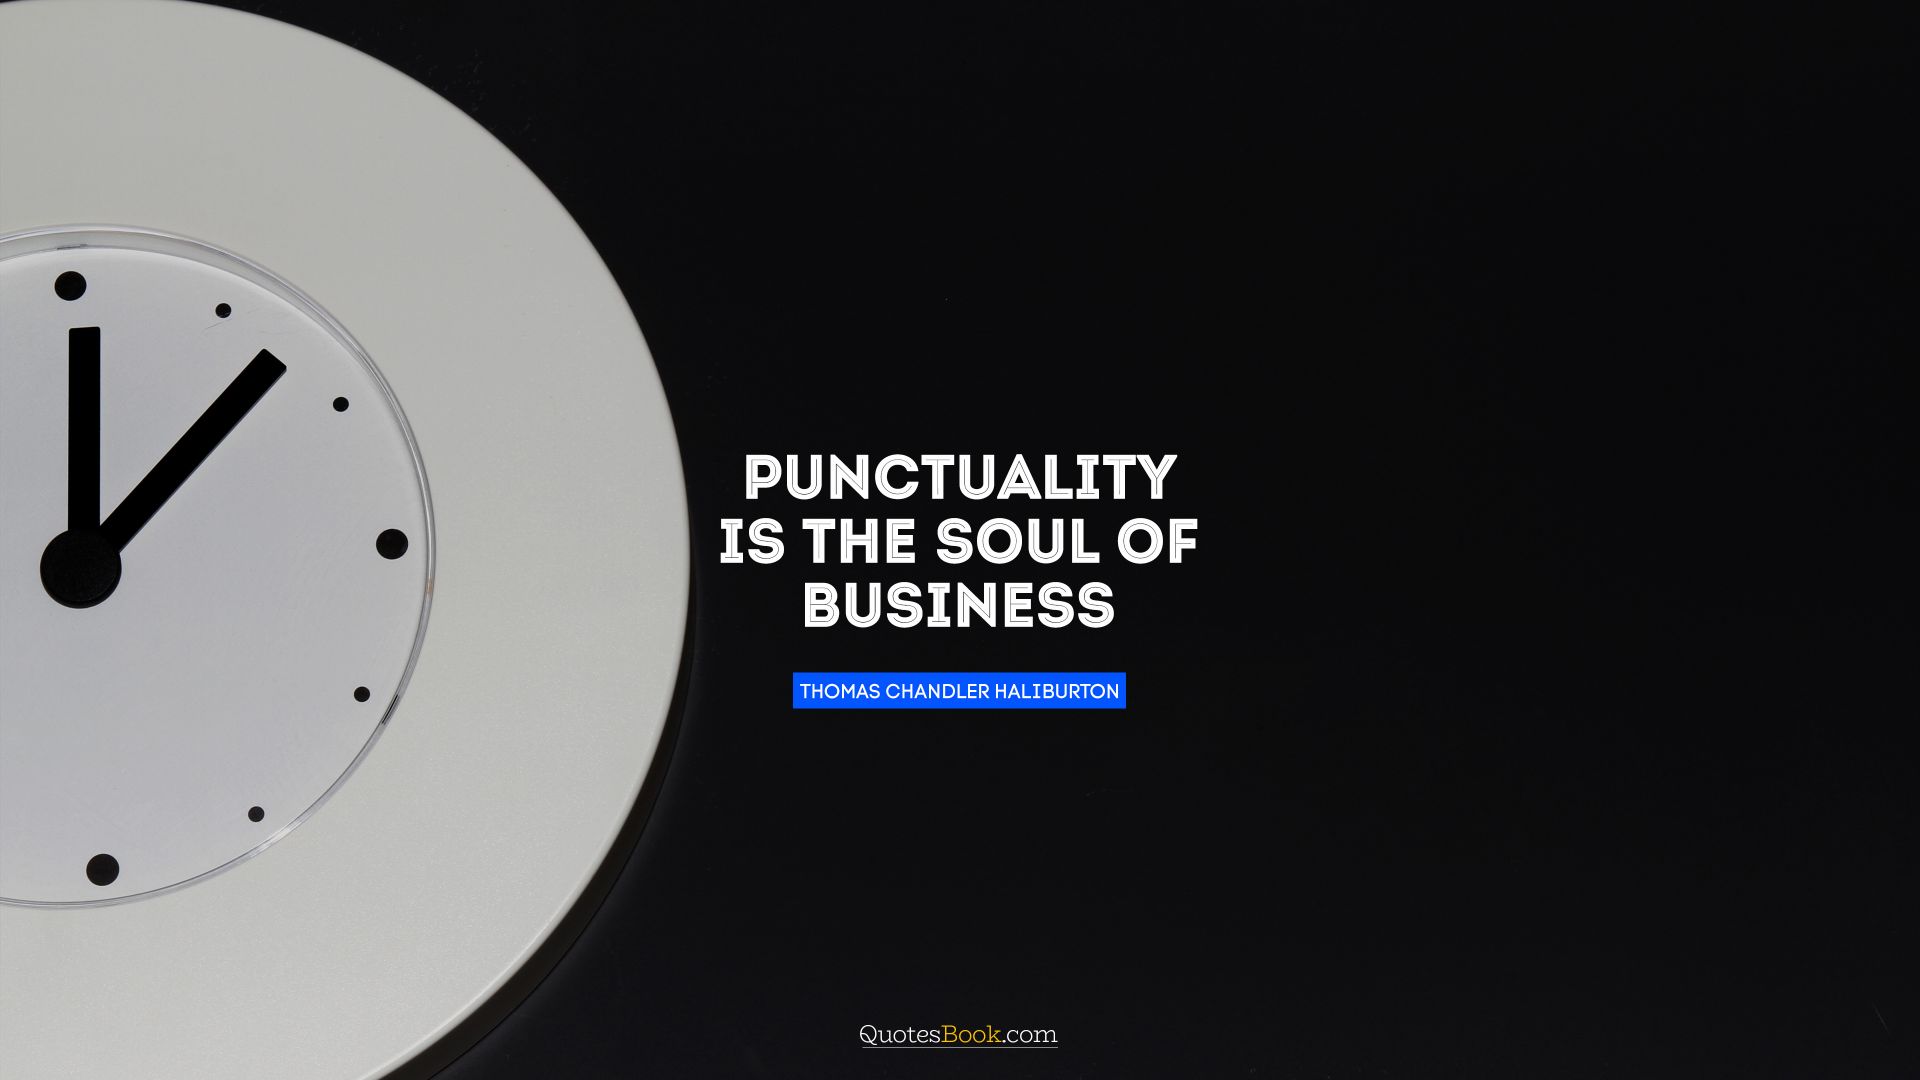 Punctuality is the soul of business. - Quote by Thomas Chandler Haliburton